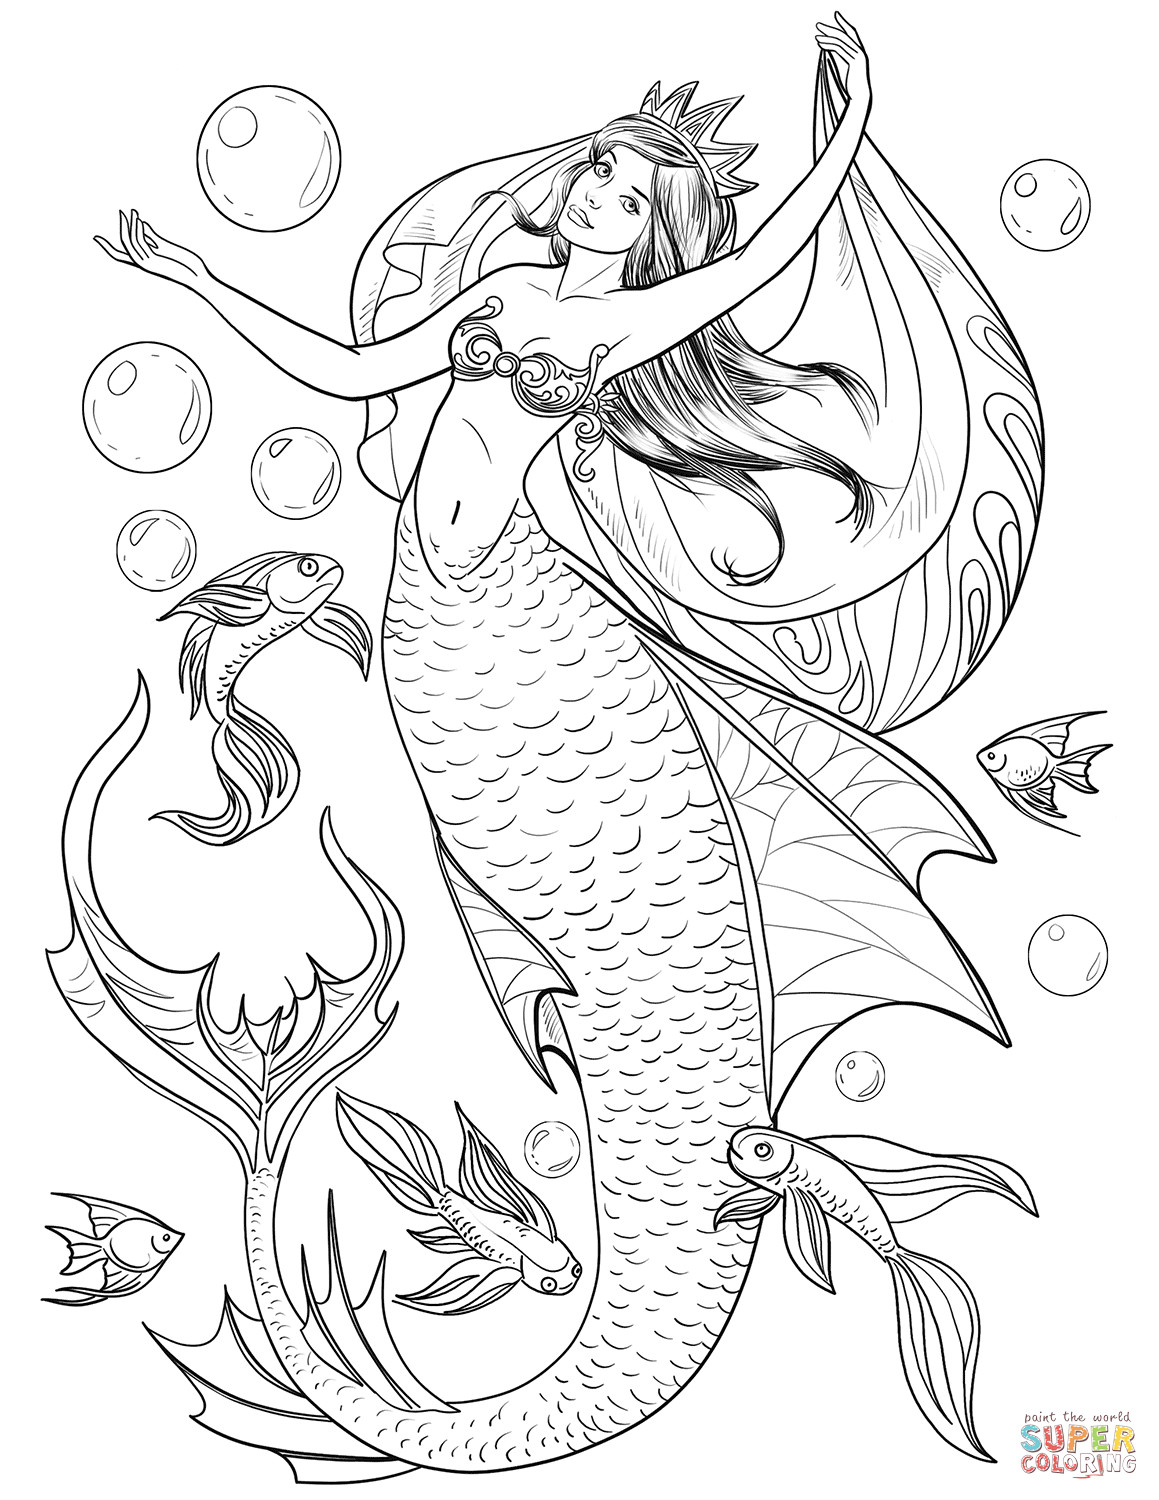 Printable Mermaid Coloring Pages For Girls
 Mermaid coloring page